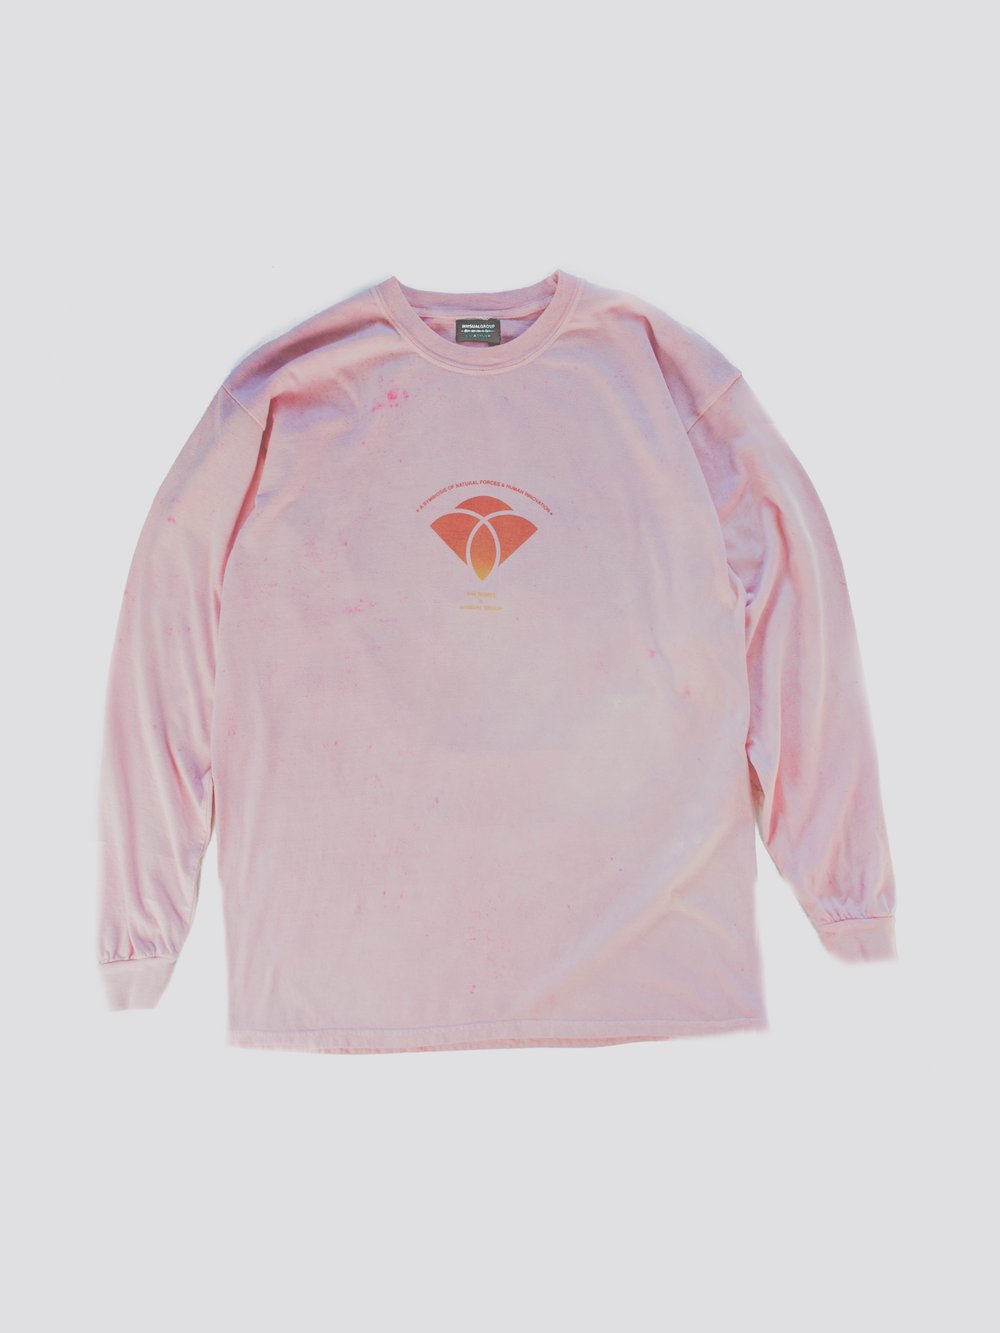 Image of "FLORAL DOME" RAIN DYED SHIRT